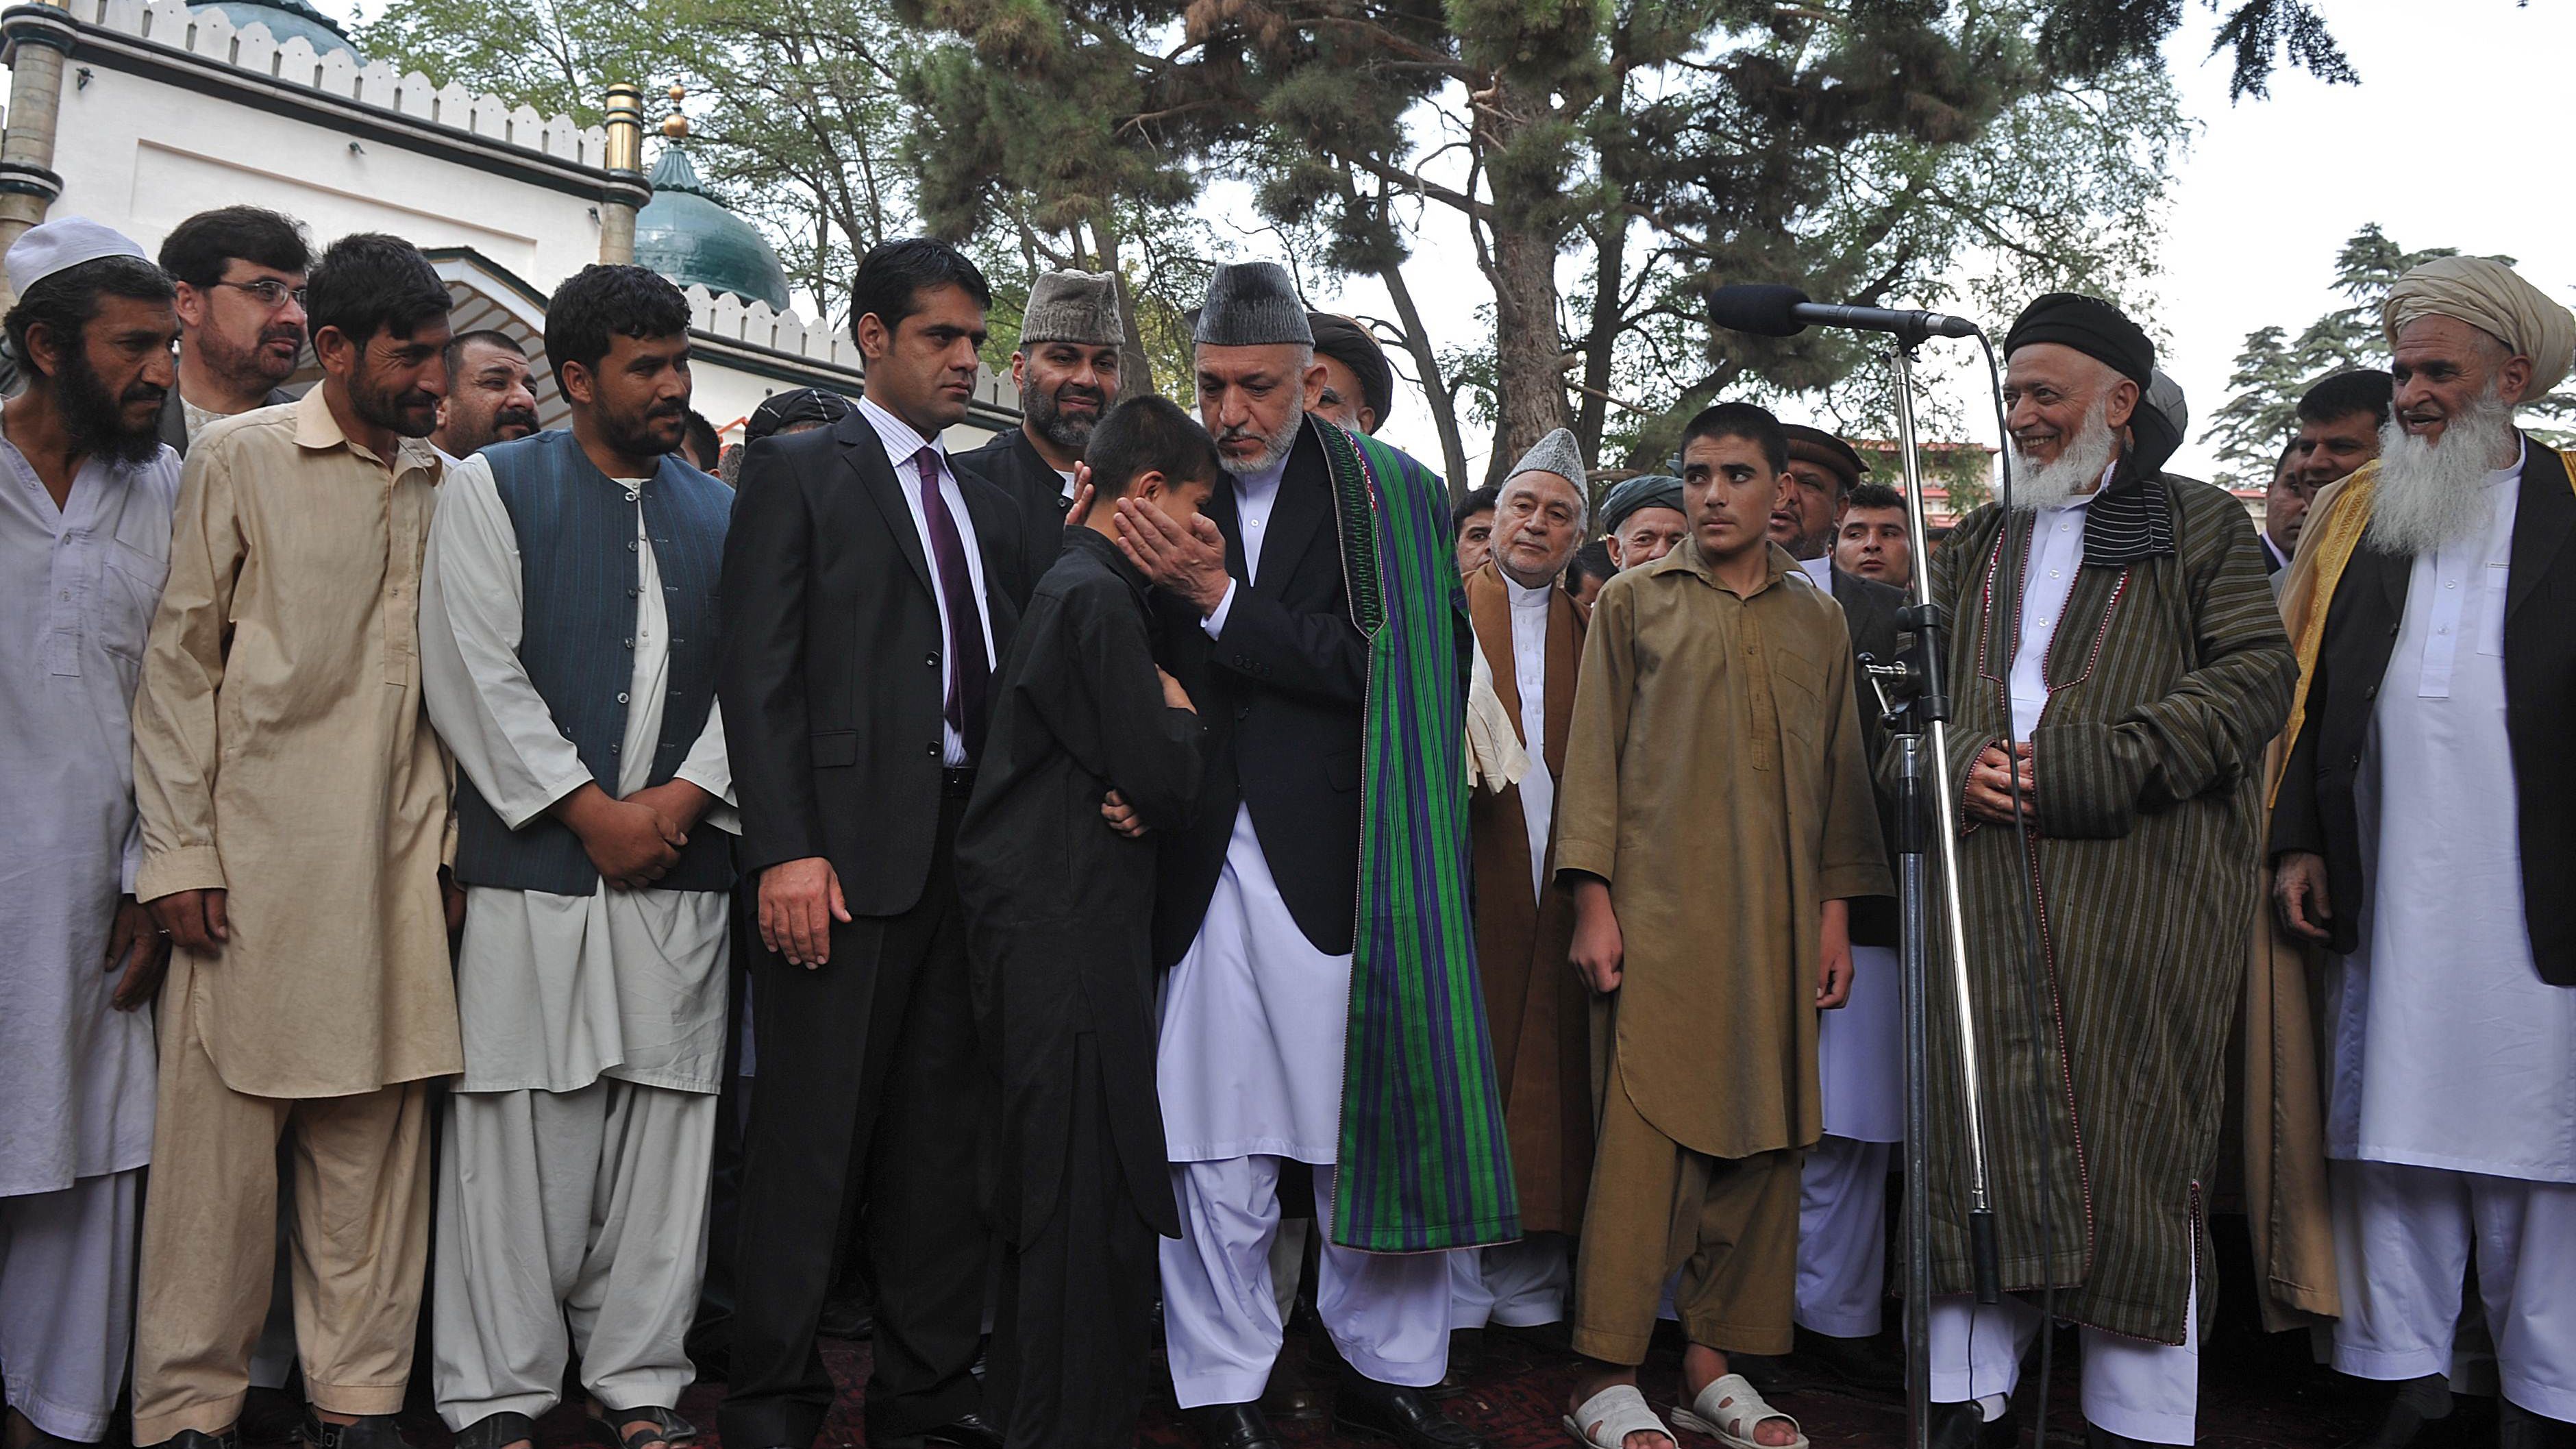 Afghanistan's President Hamid Karzai pardons a would-be child suicide bomber on August 30, 2011.